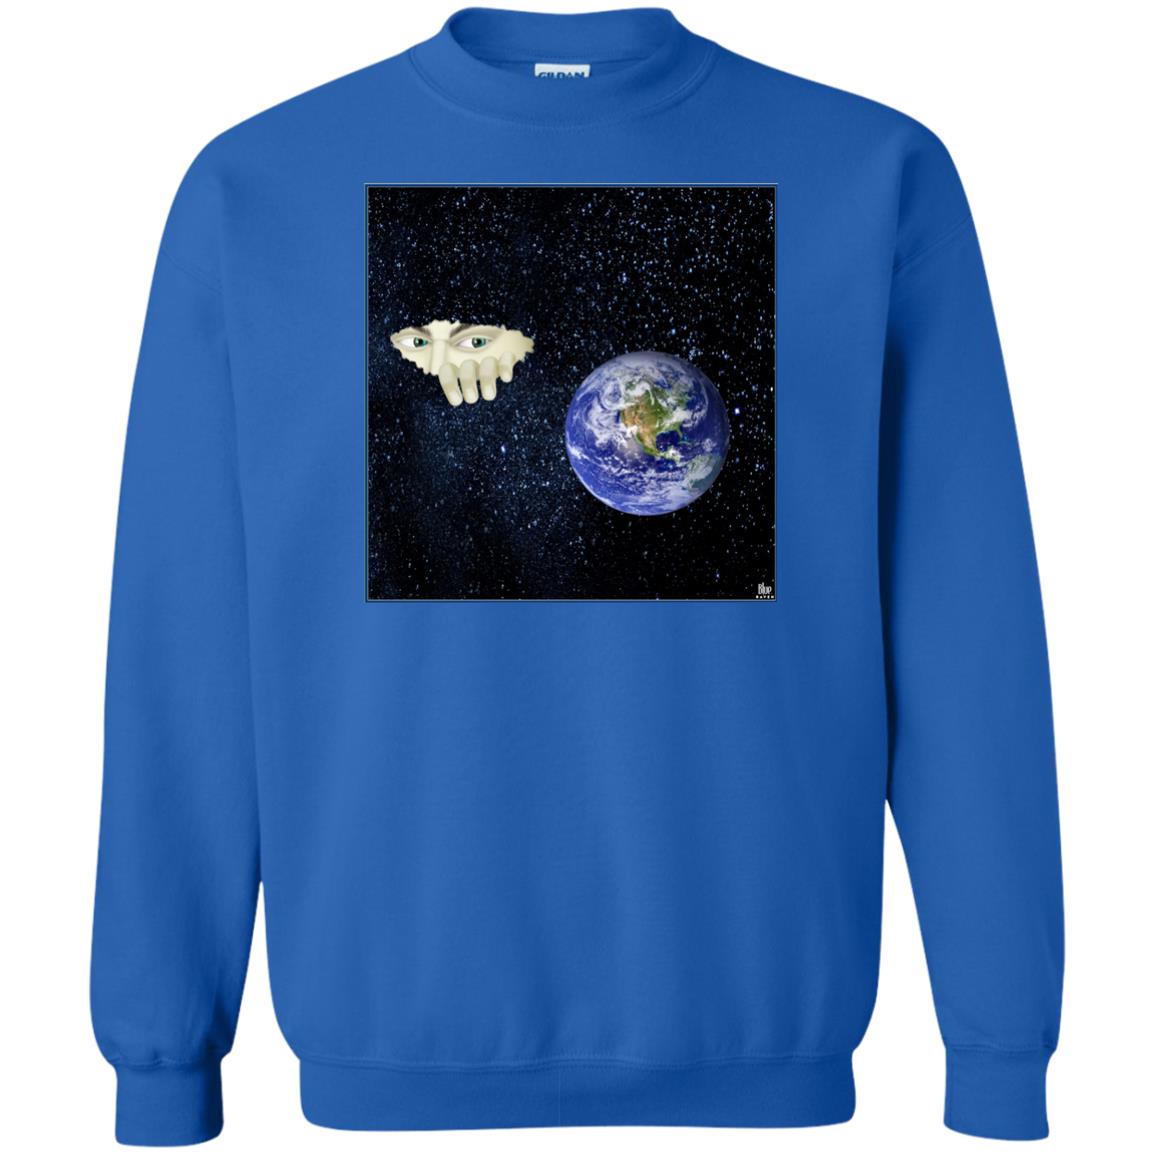 SOMEWHERE OUT THERE - Men's Crew Neck Sweatshirt